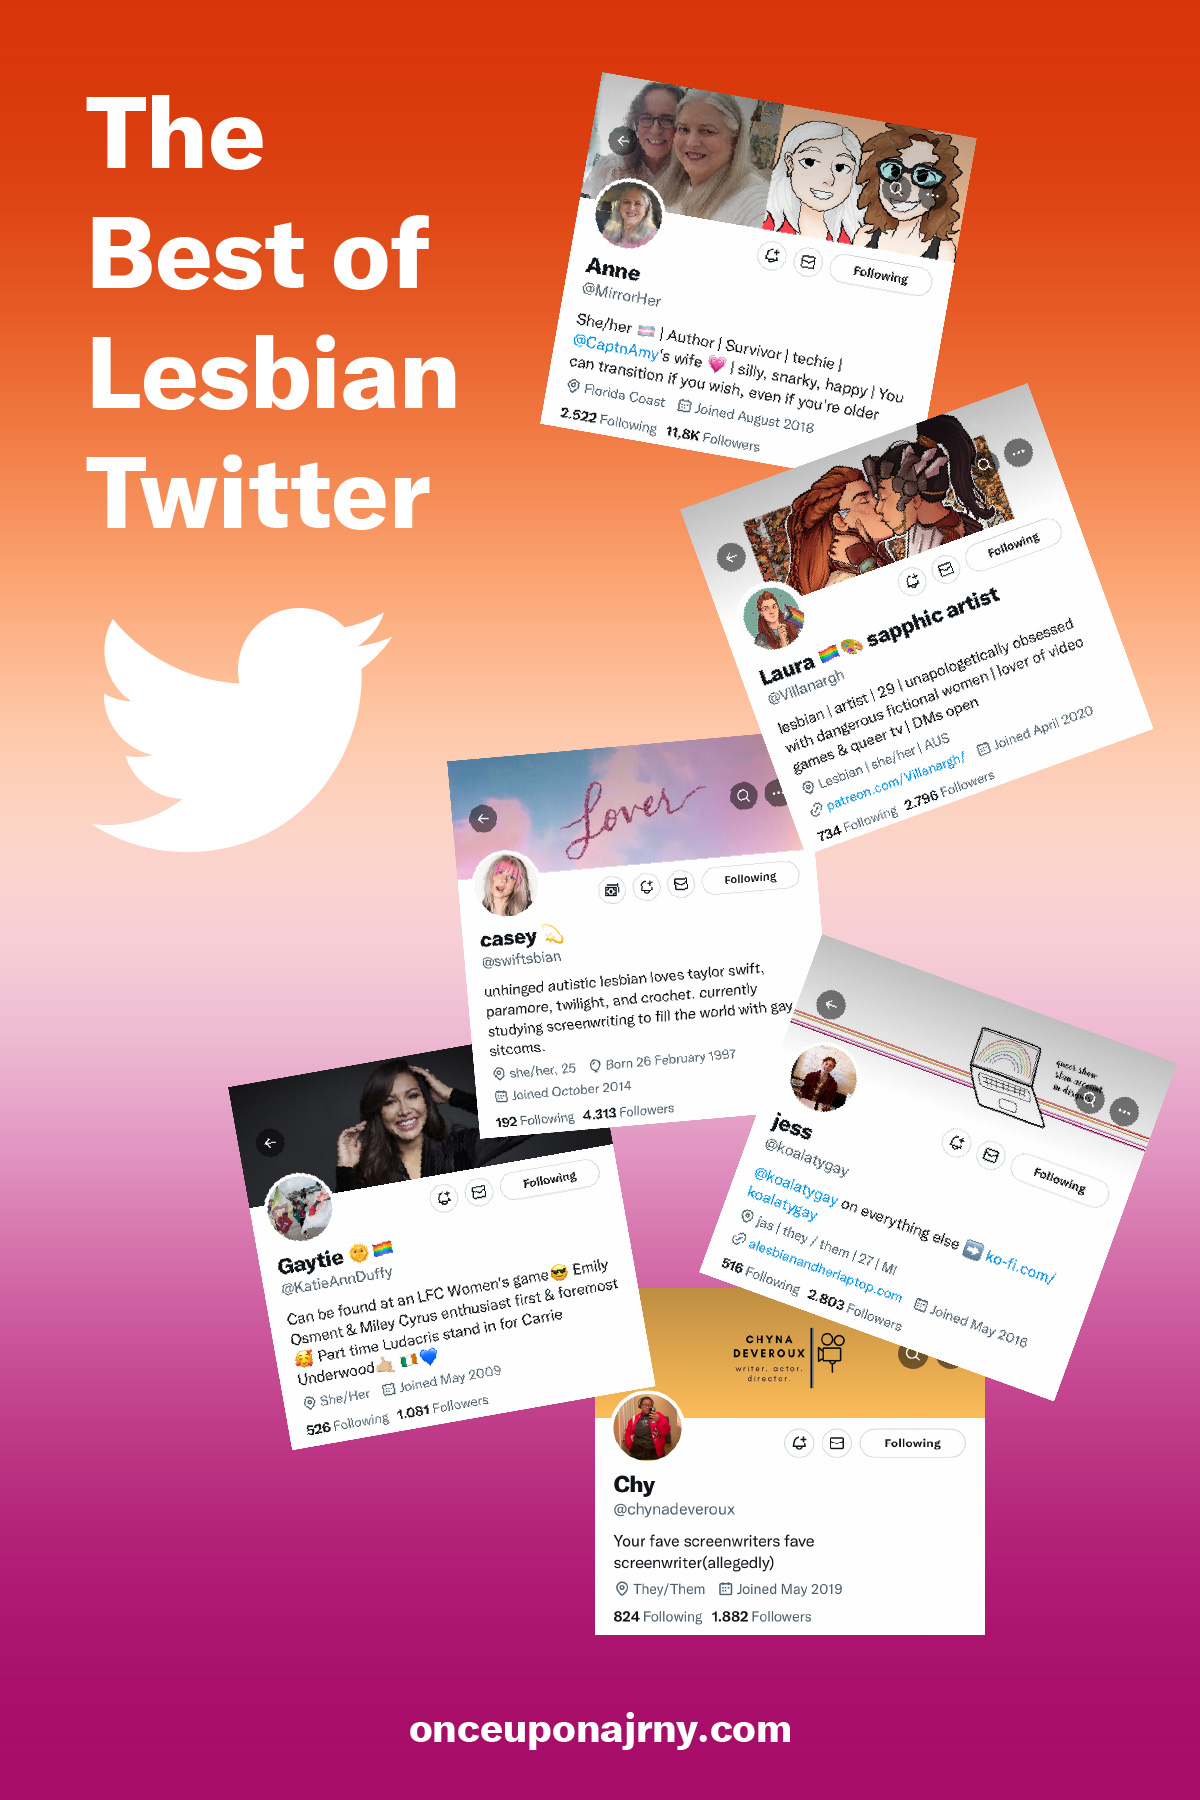 The Best of Lesbian Twitter onceuponajrny.com